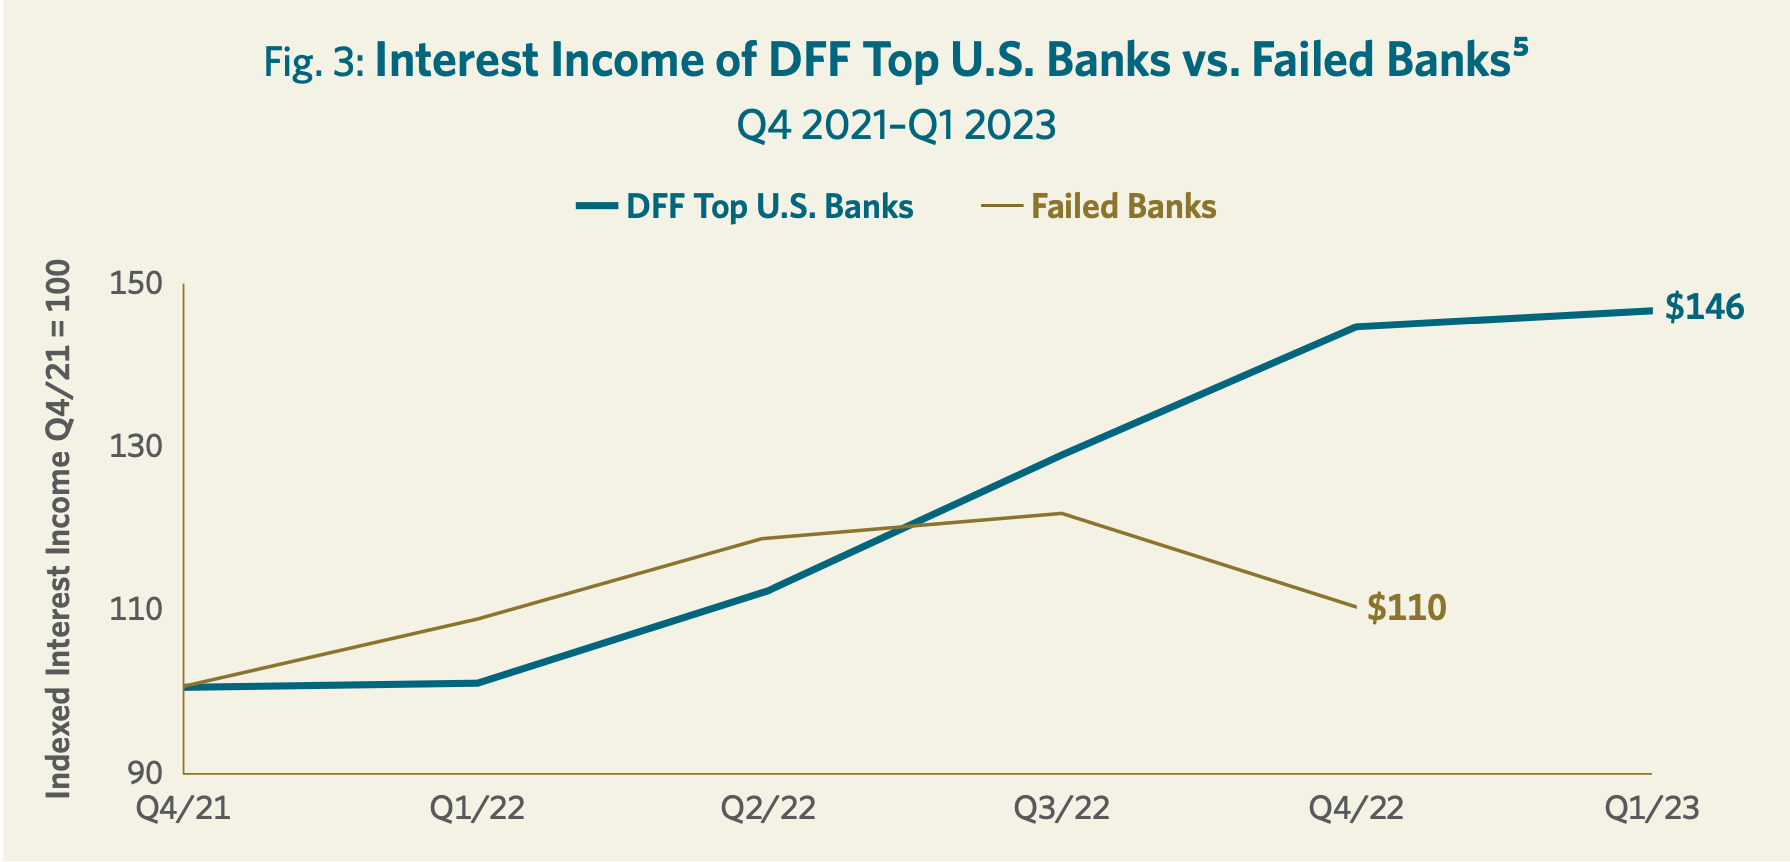 Fig. 3: Interest Income of DFF Top U.S. Banks vs. Failed Banks